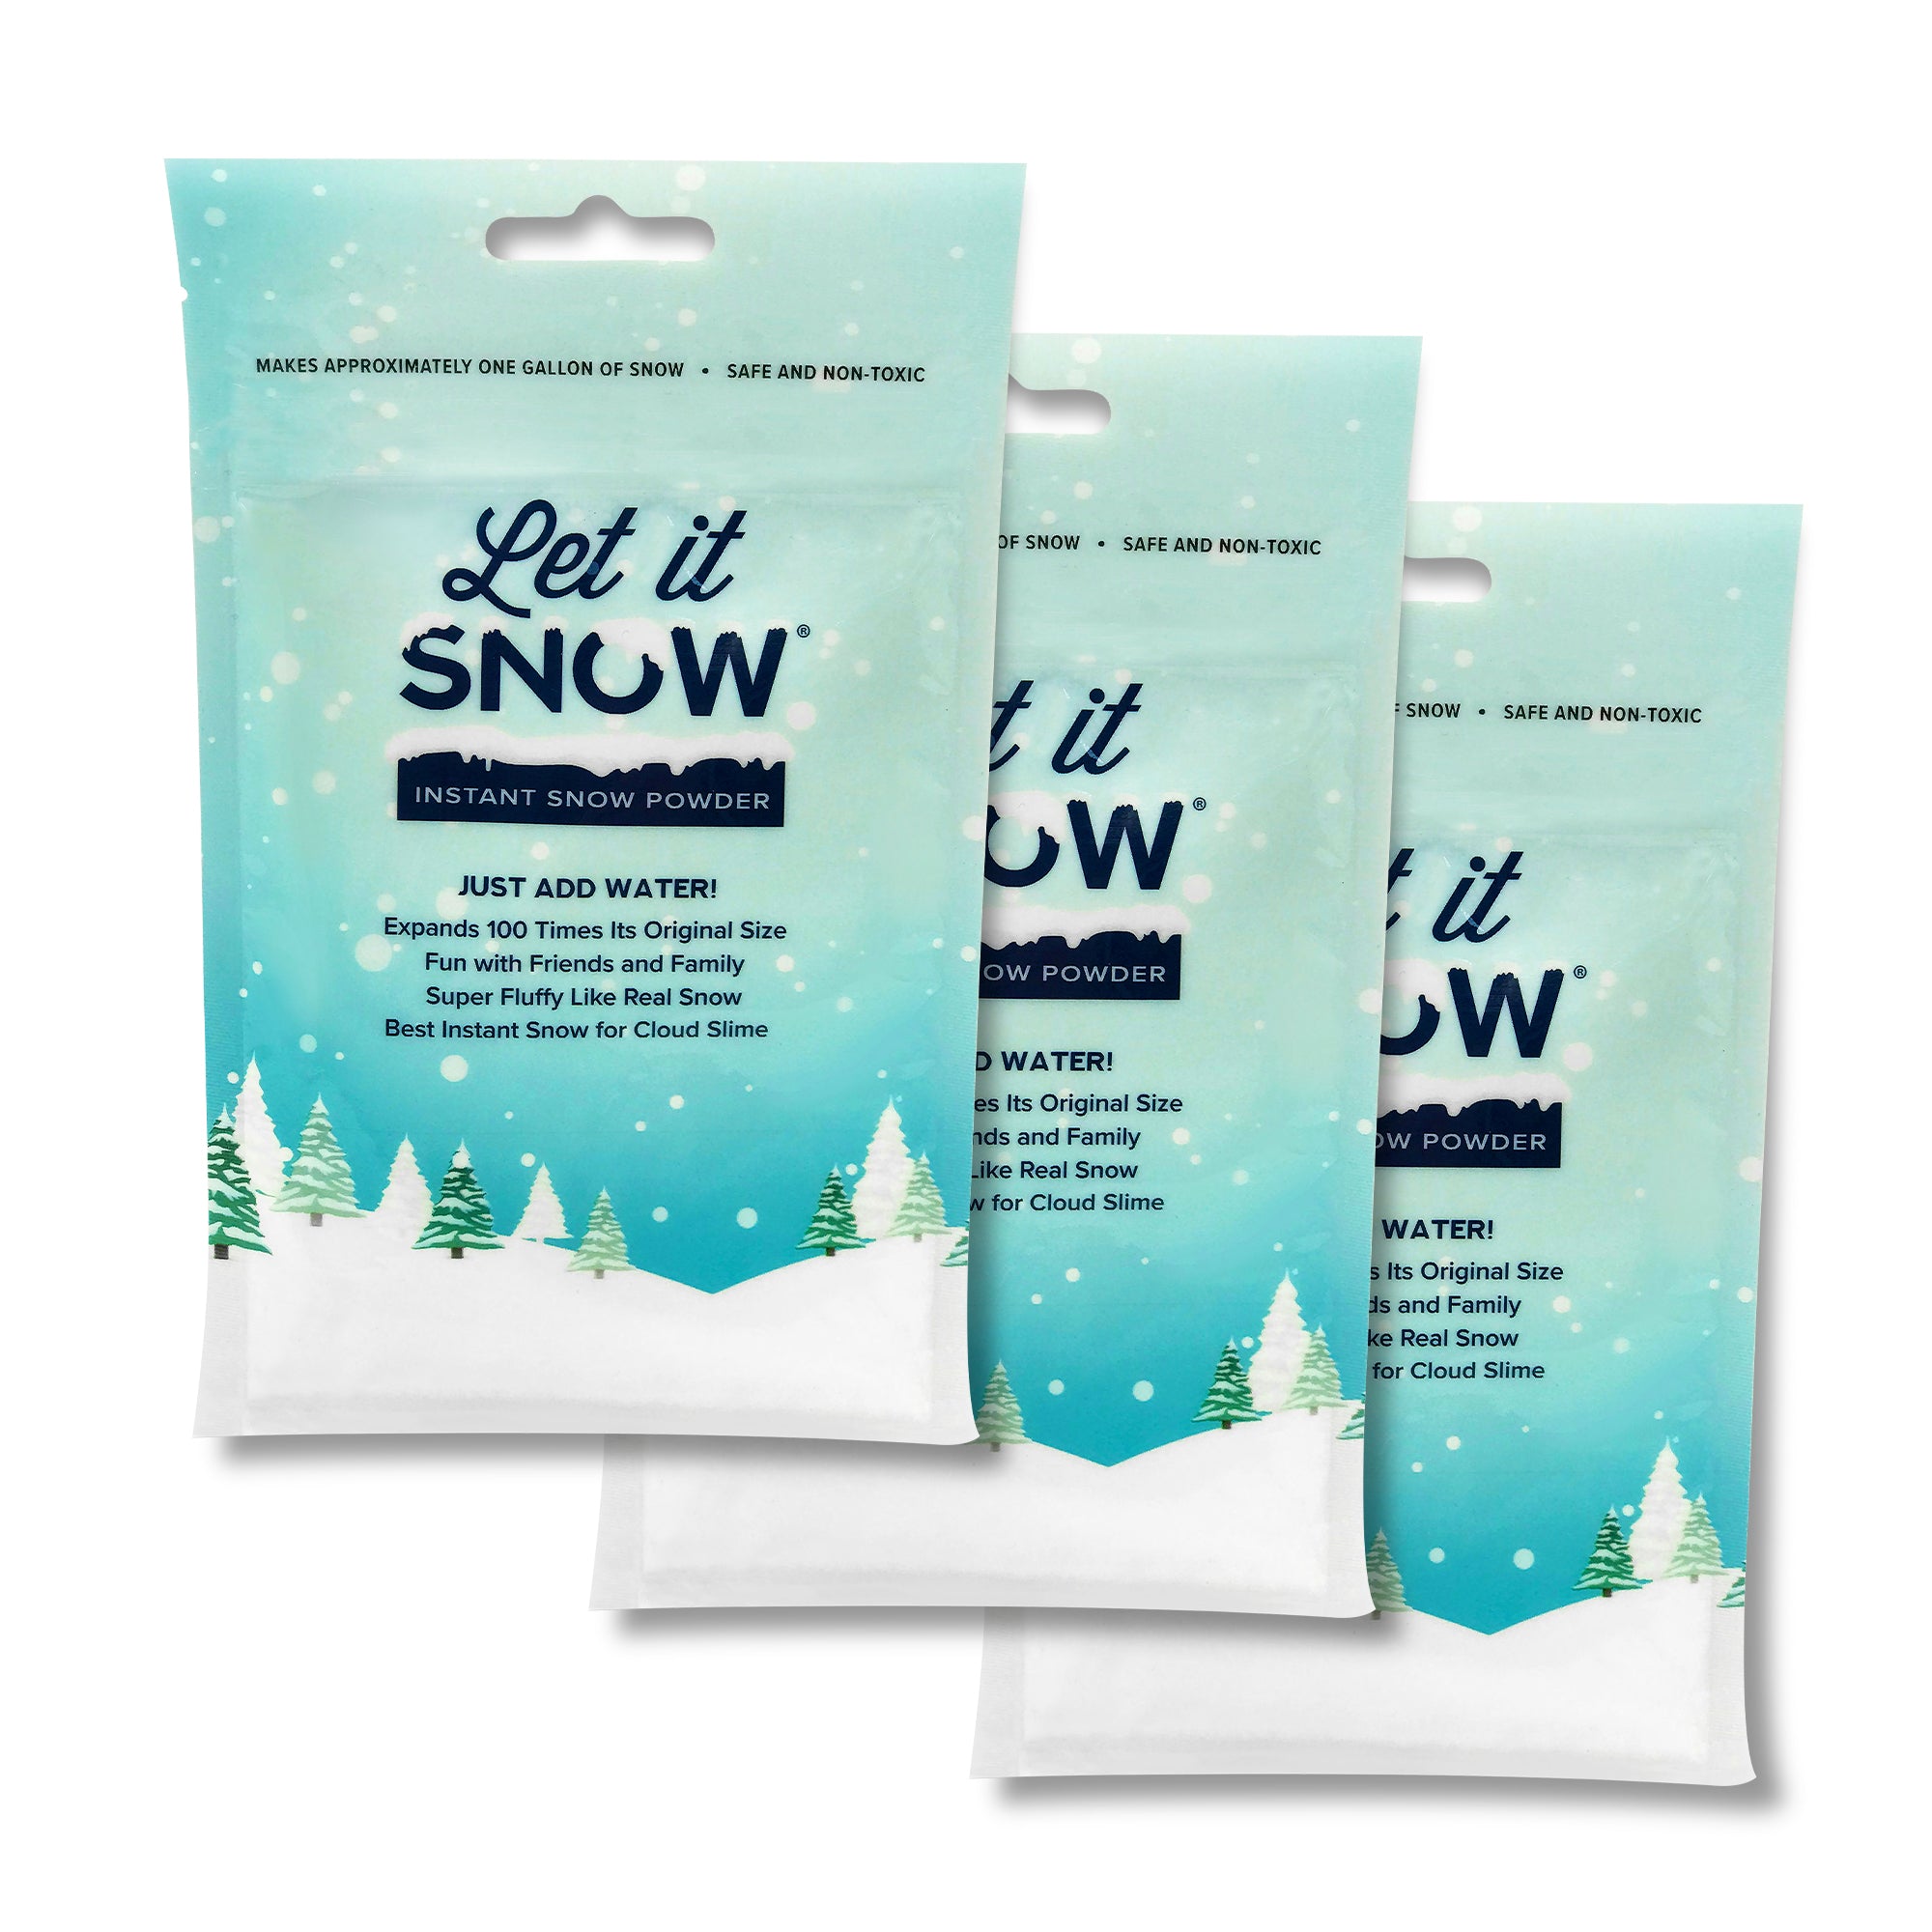 Let it Snow Decorative Instant Snow in Can Includes: Snow Powder